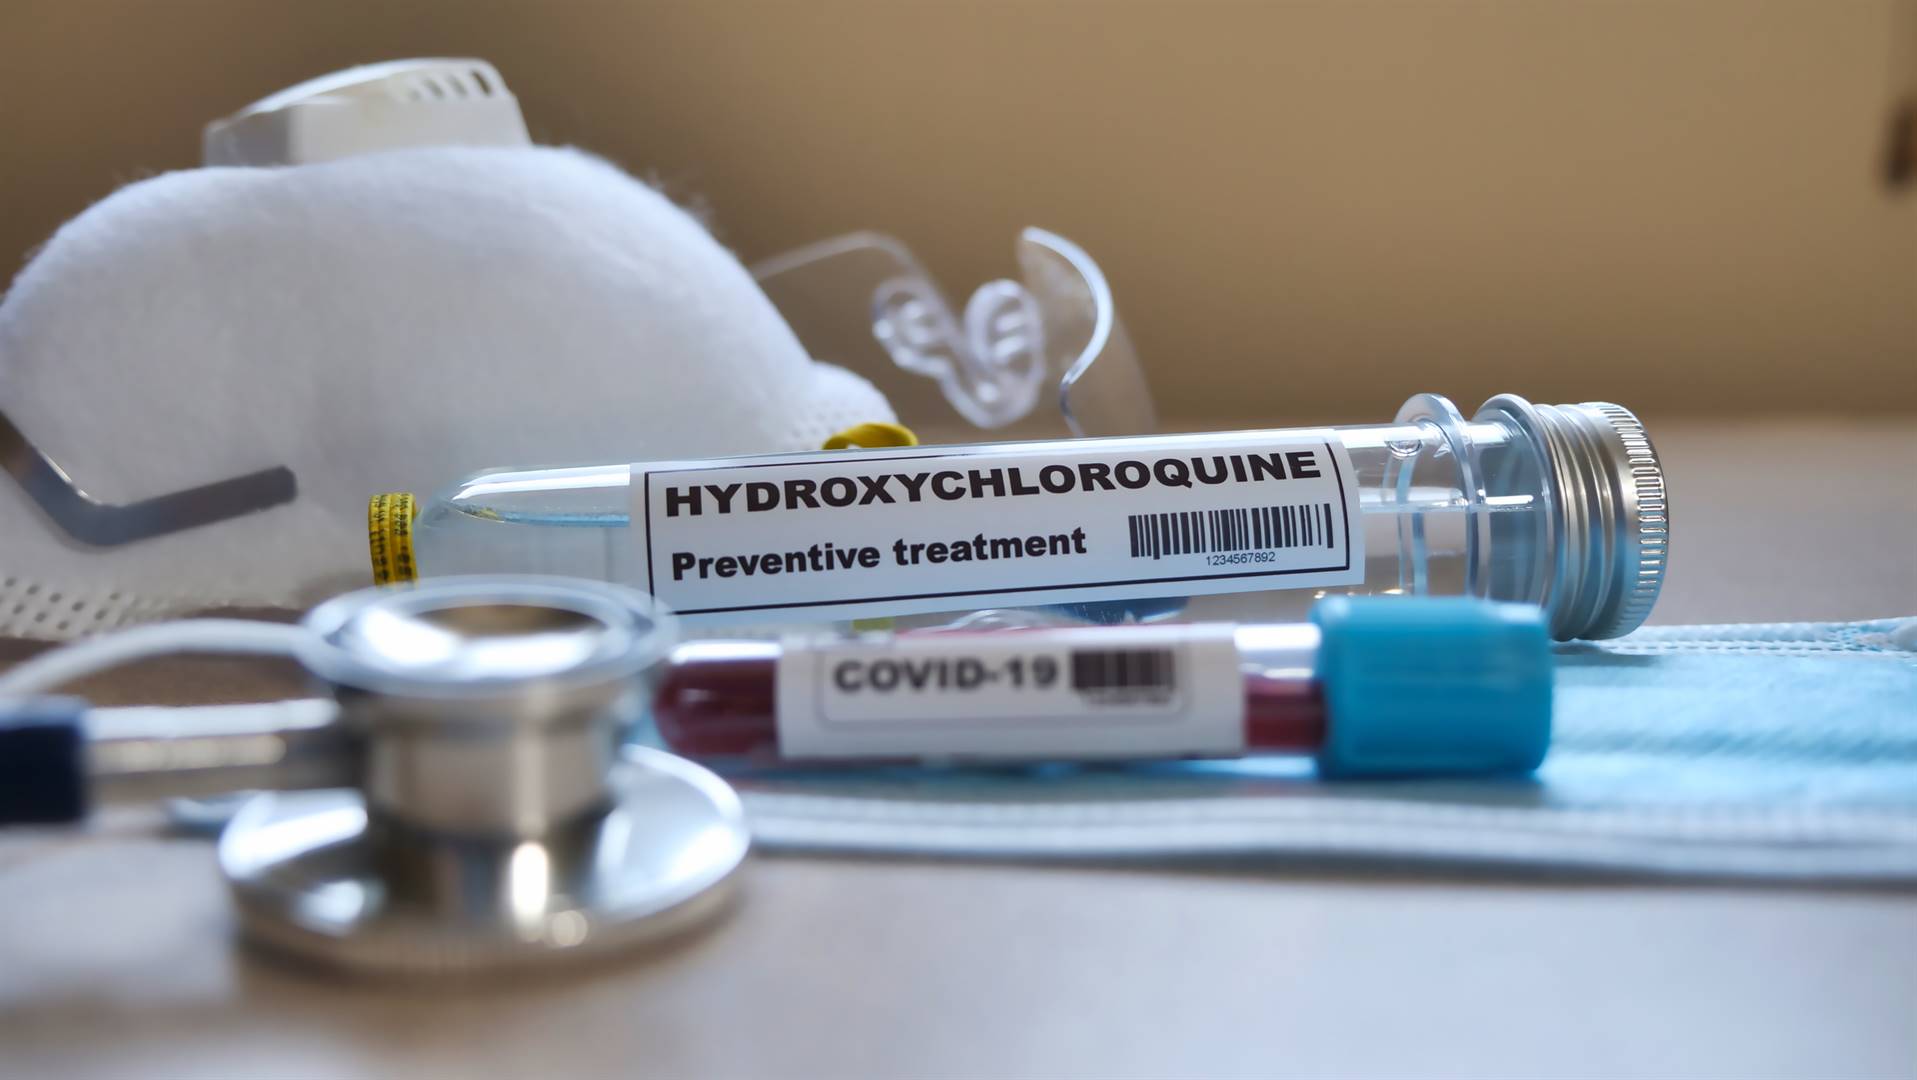 Hydroxychloroquine, best known as a treatment for malaria, has been used in various Covid-19 trials. Picture: iStock